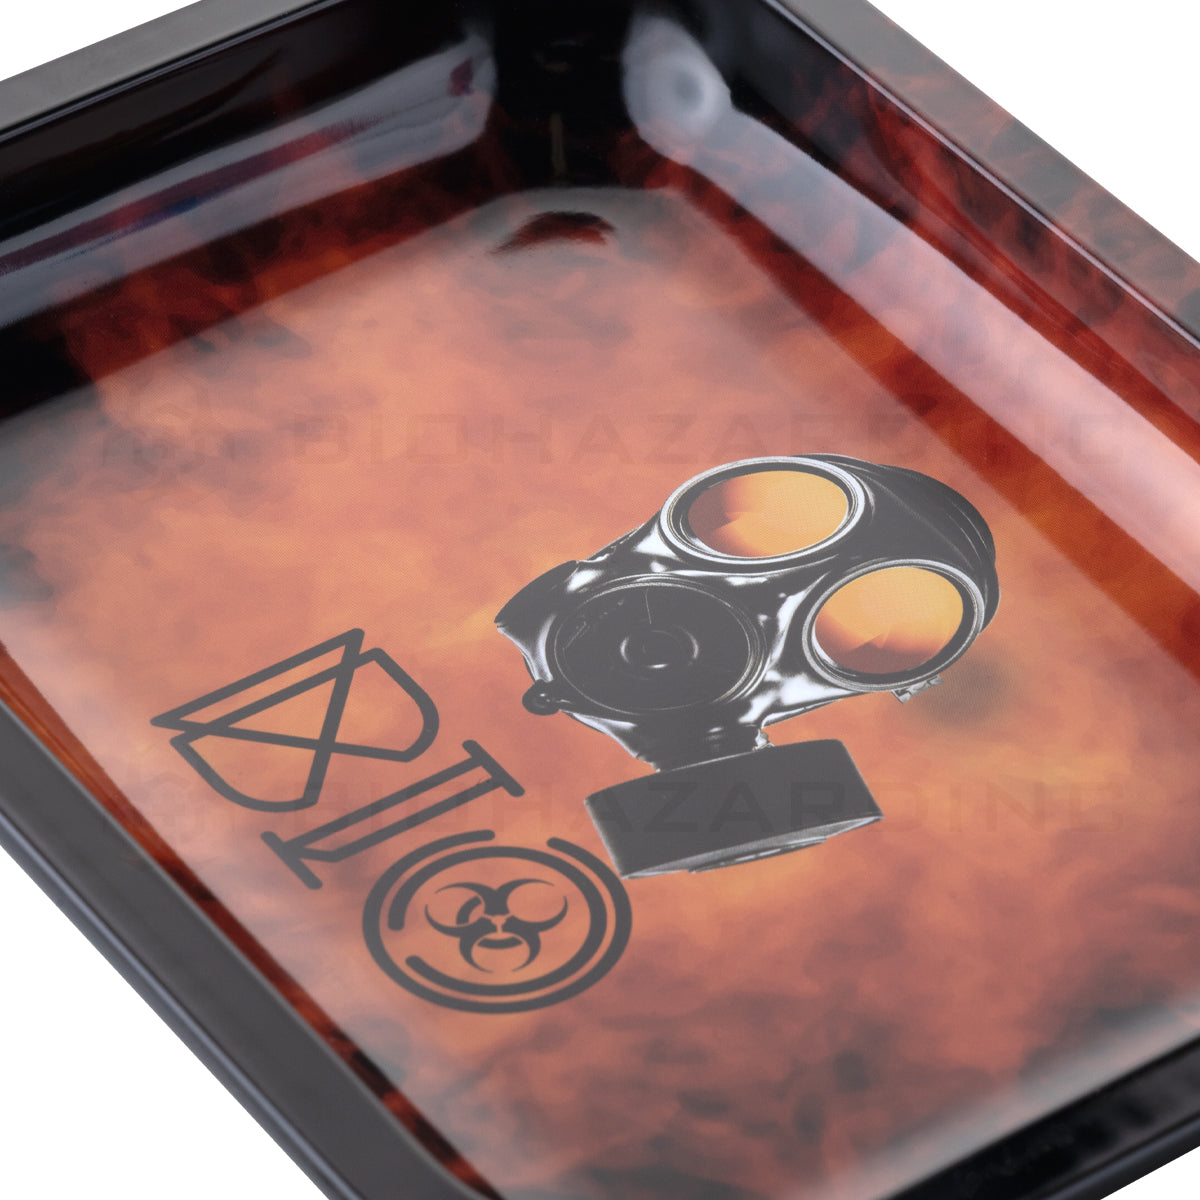 BIO Glass | 'Red Gas Mask' Rolling Tray | 7.5" x 5.5" - Small - Metal Rolling Tray Bio Glass   